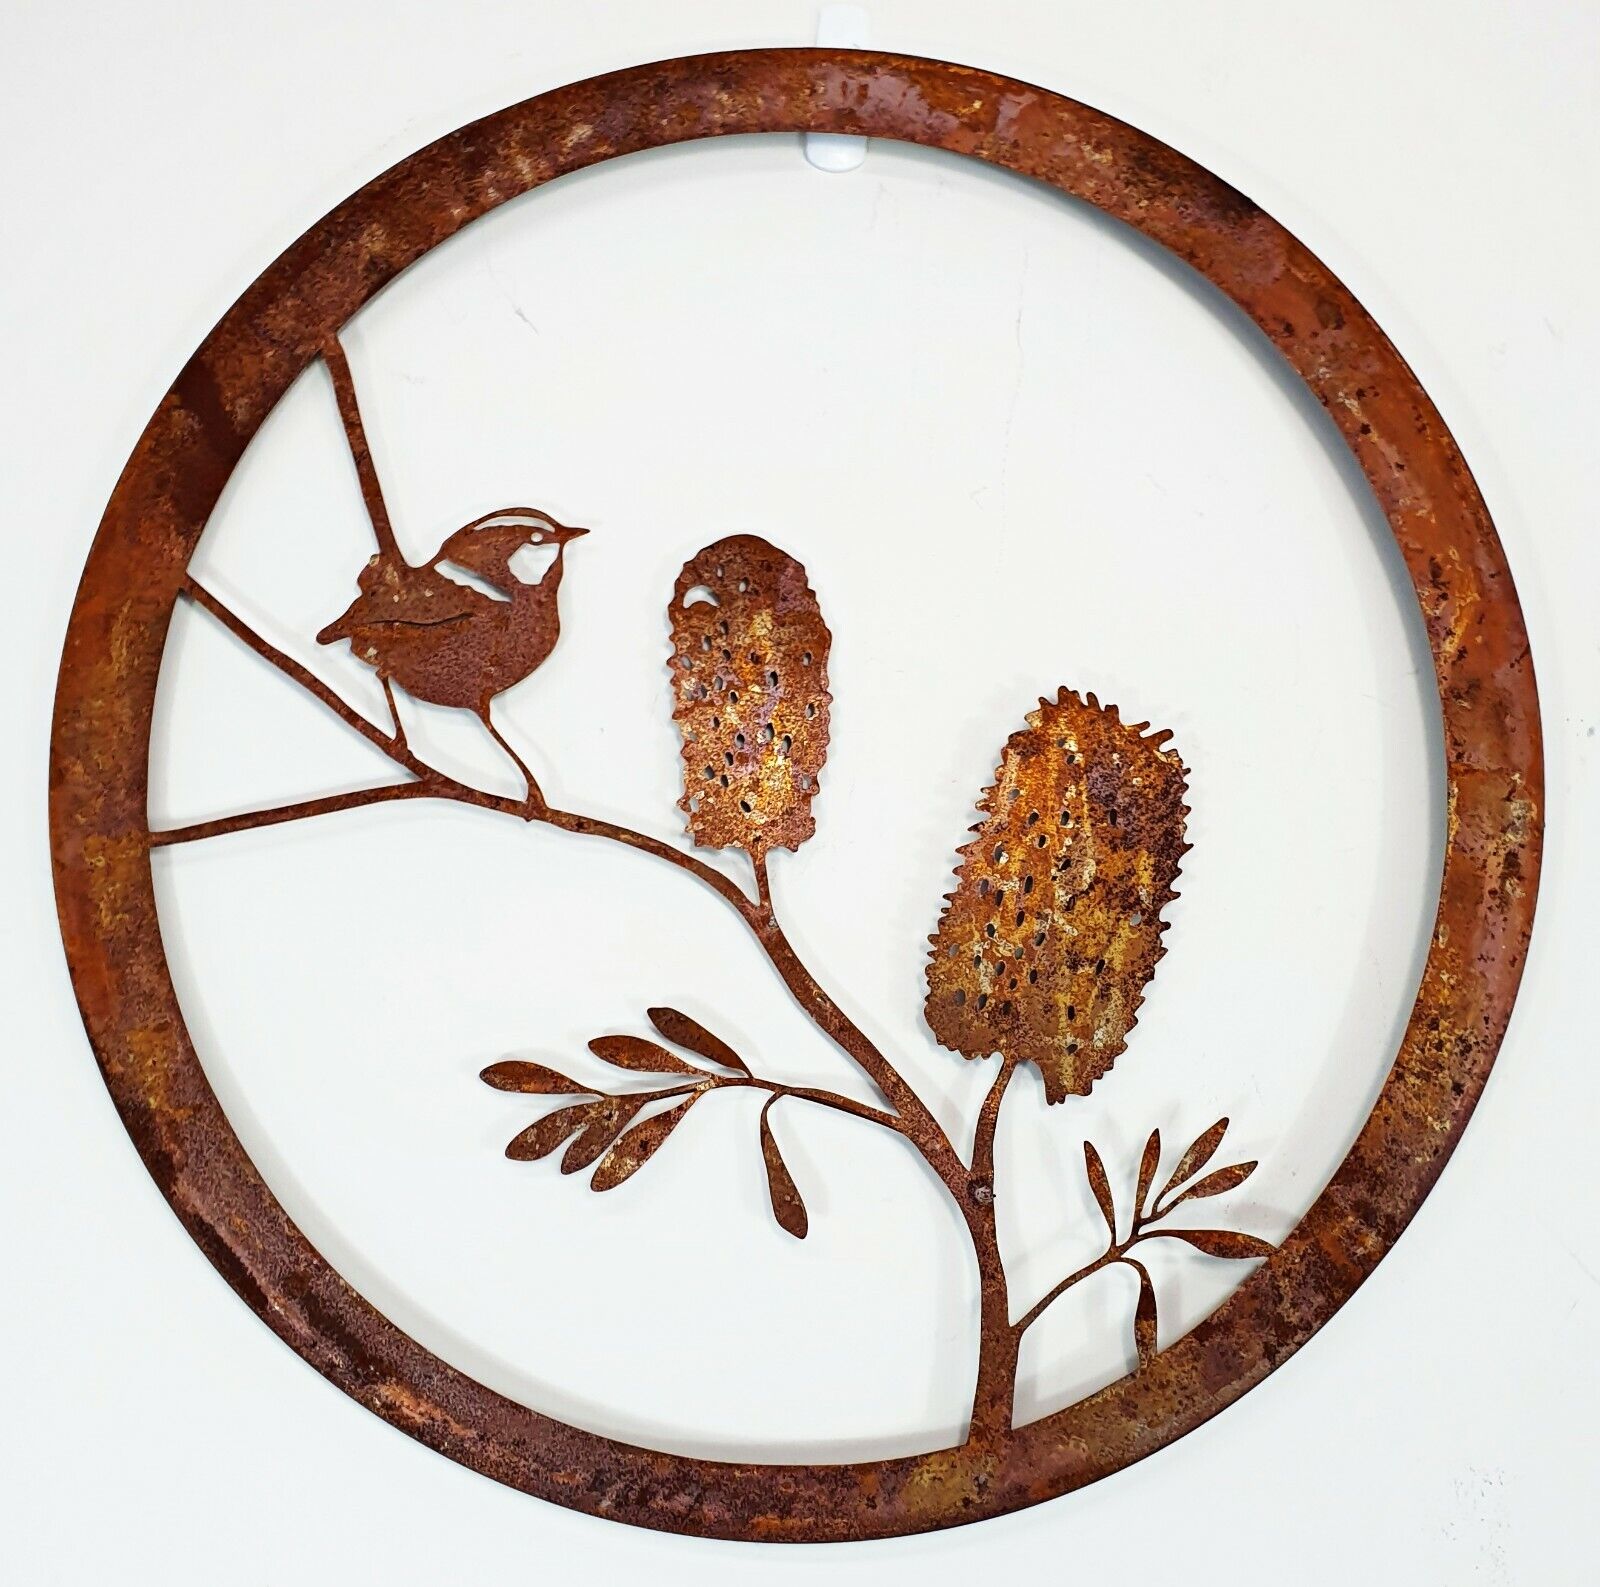 WILLY WAGTAIL IN BOTTLEBRUSH WALL ART RUST